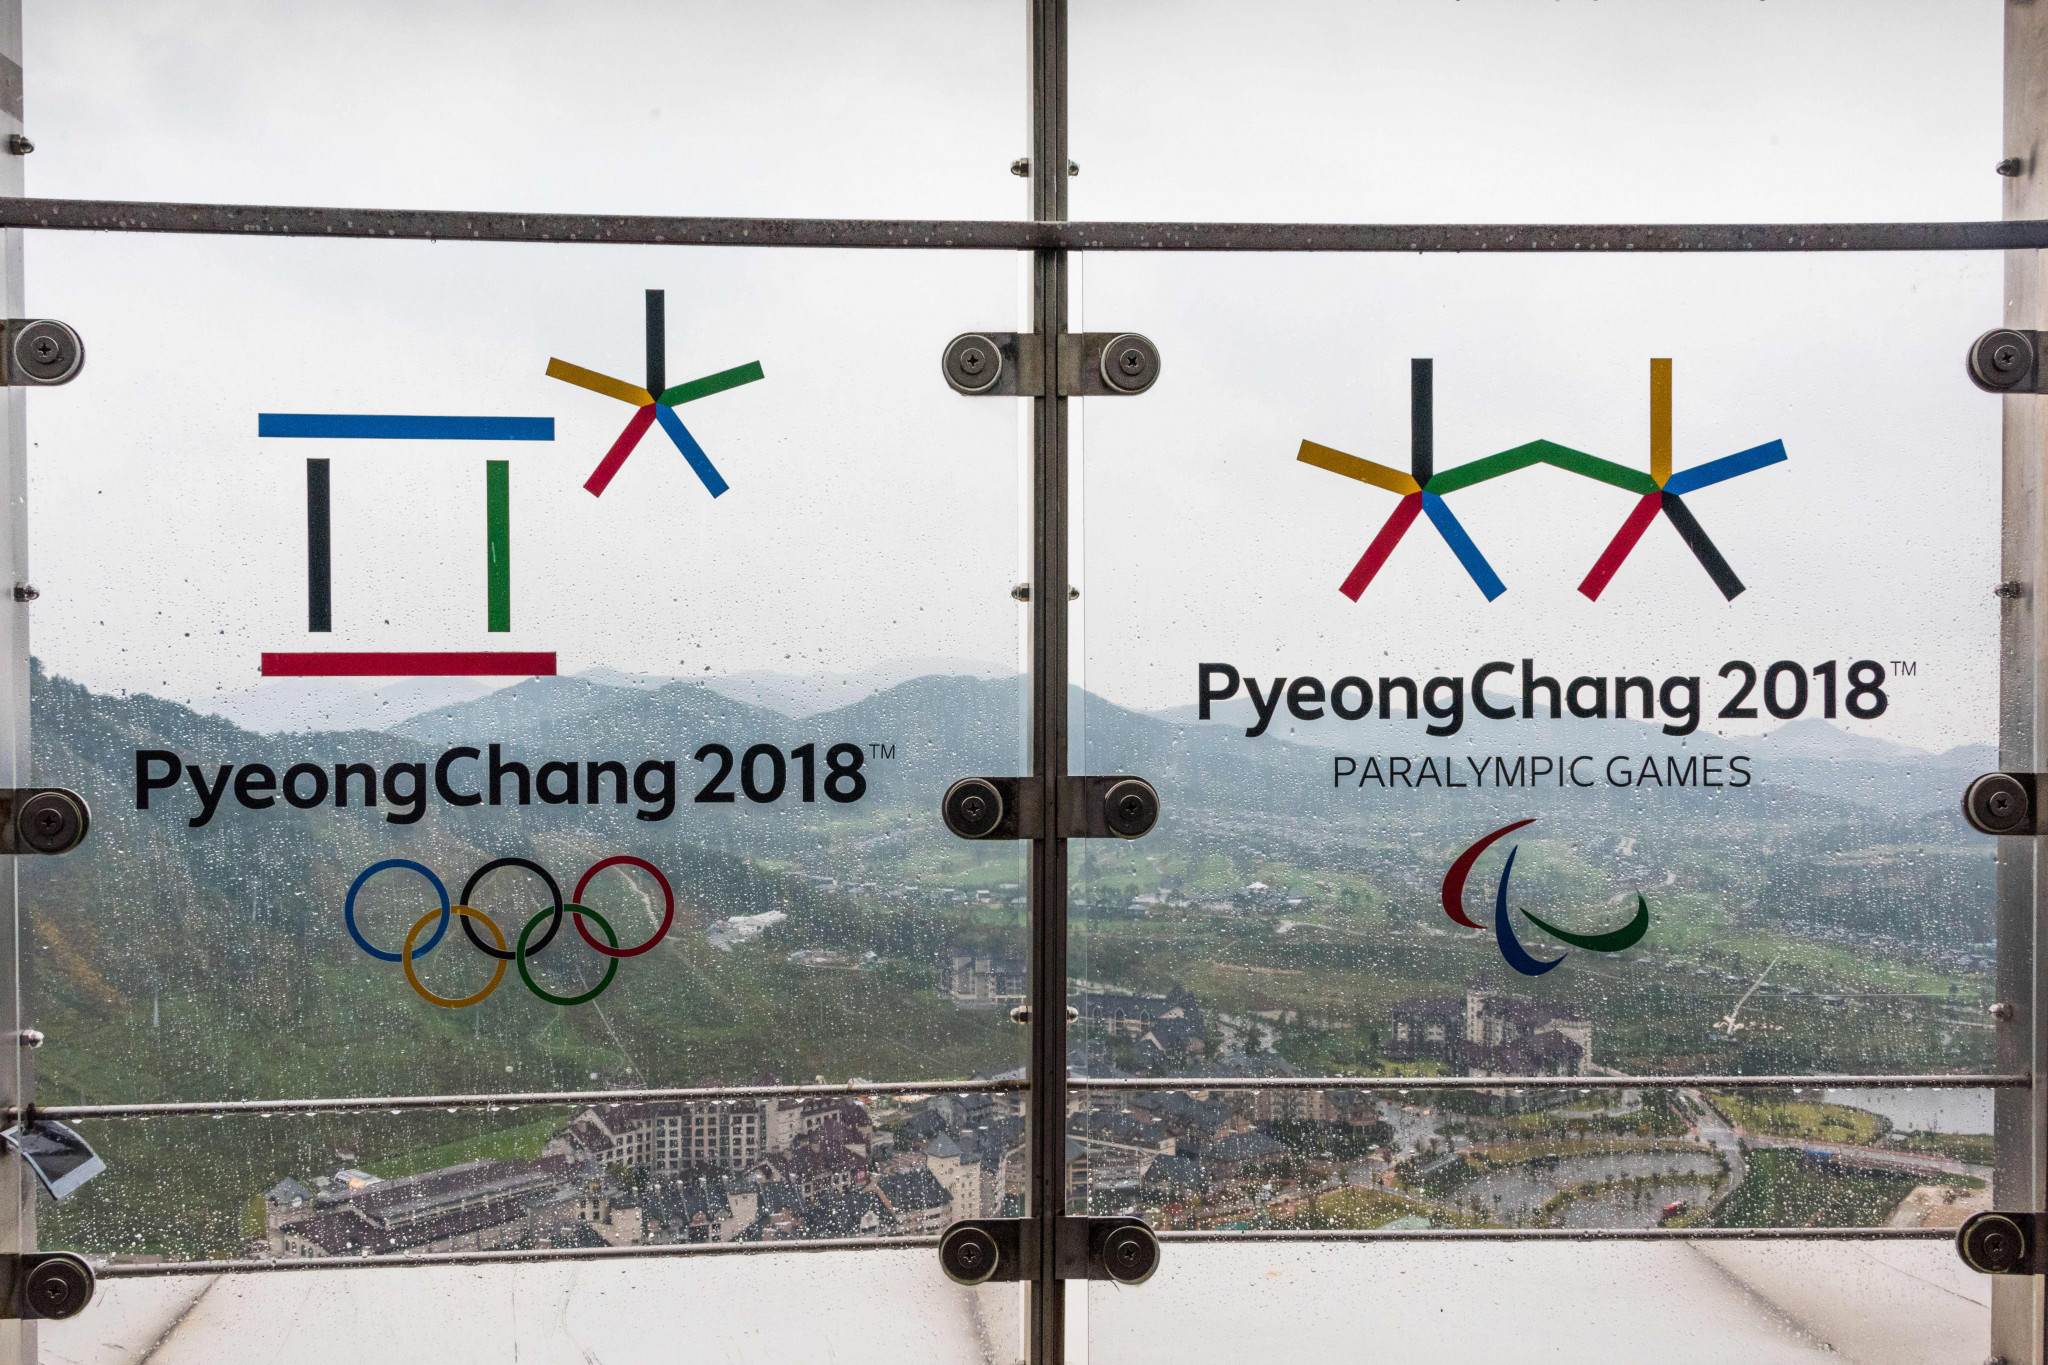 More than half of Pyeongchang 2018 Paralympic tickets sold, IPC reveal